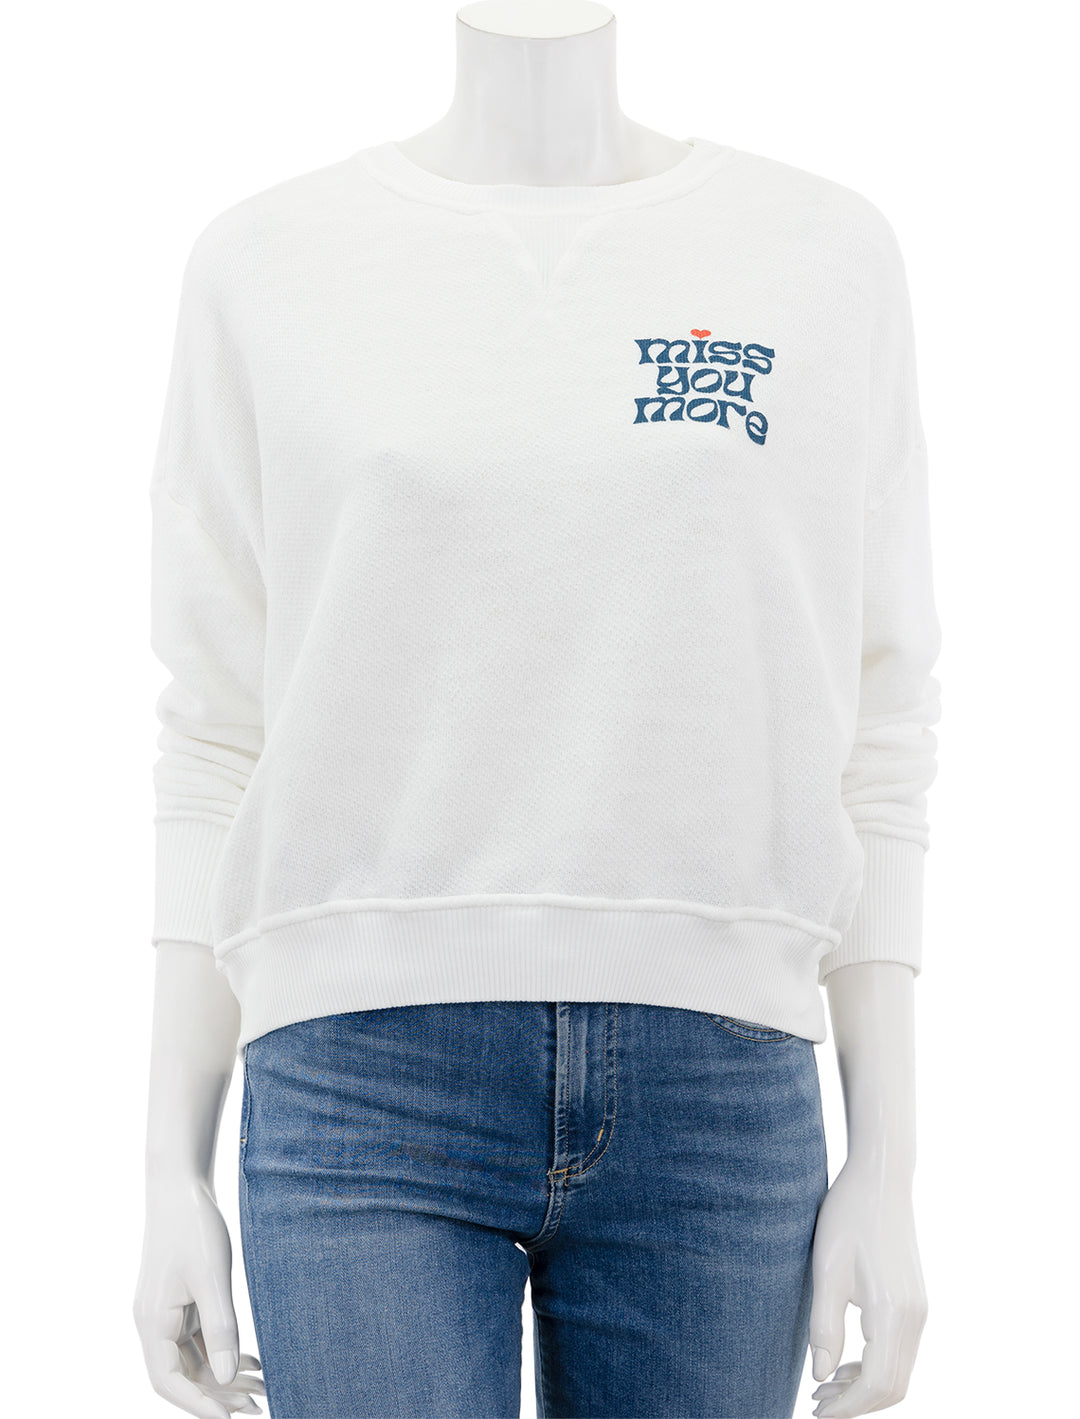 Front view of ASKK NY's oversized sweatshirt in miss you more.